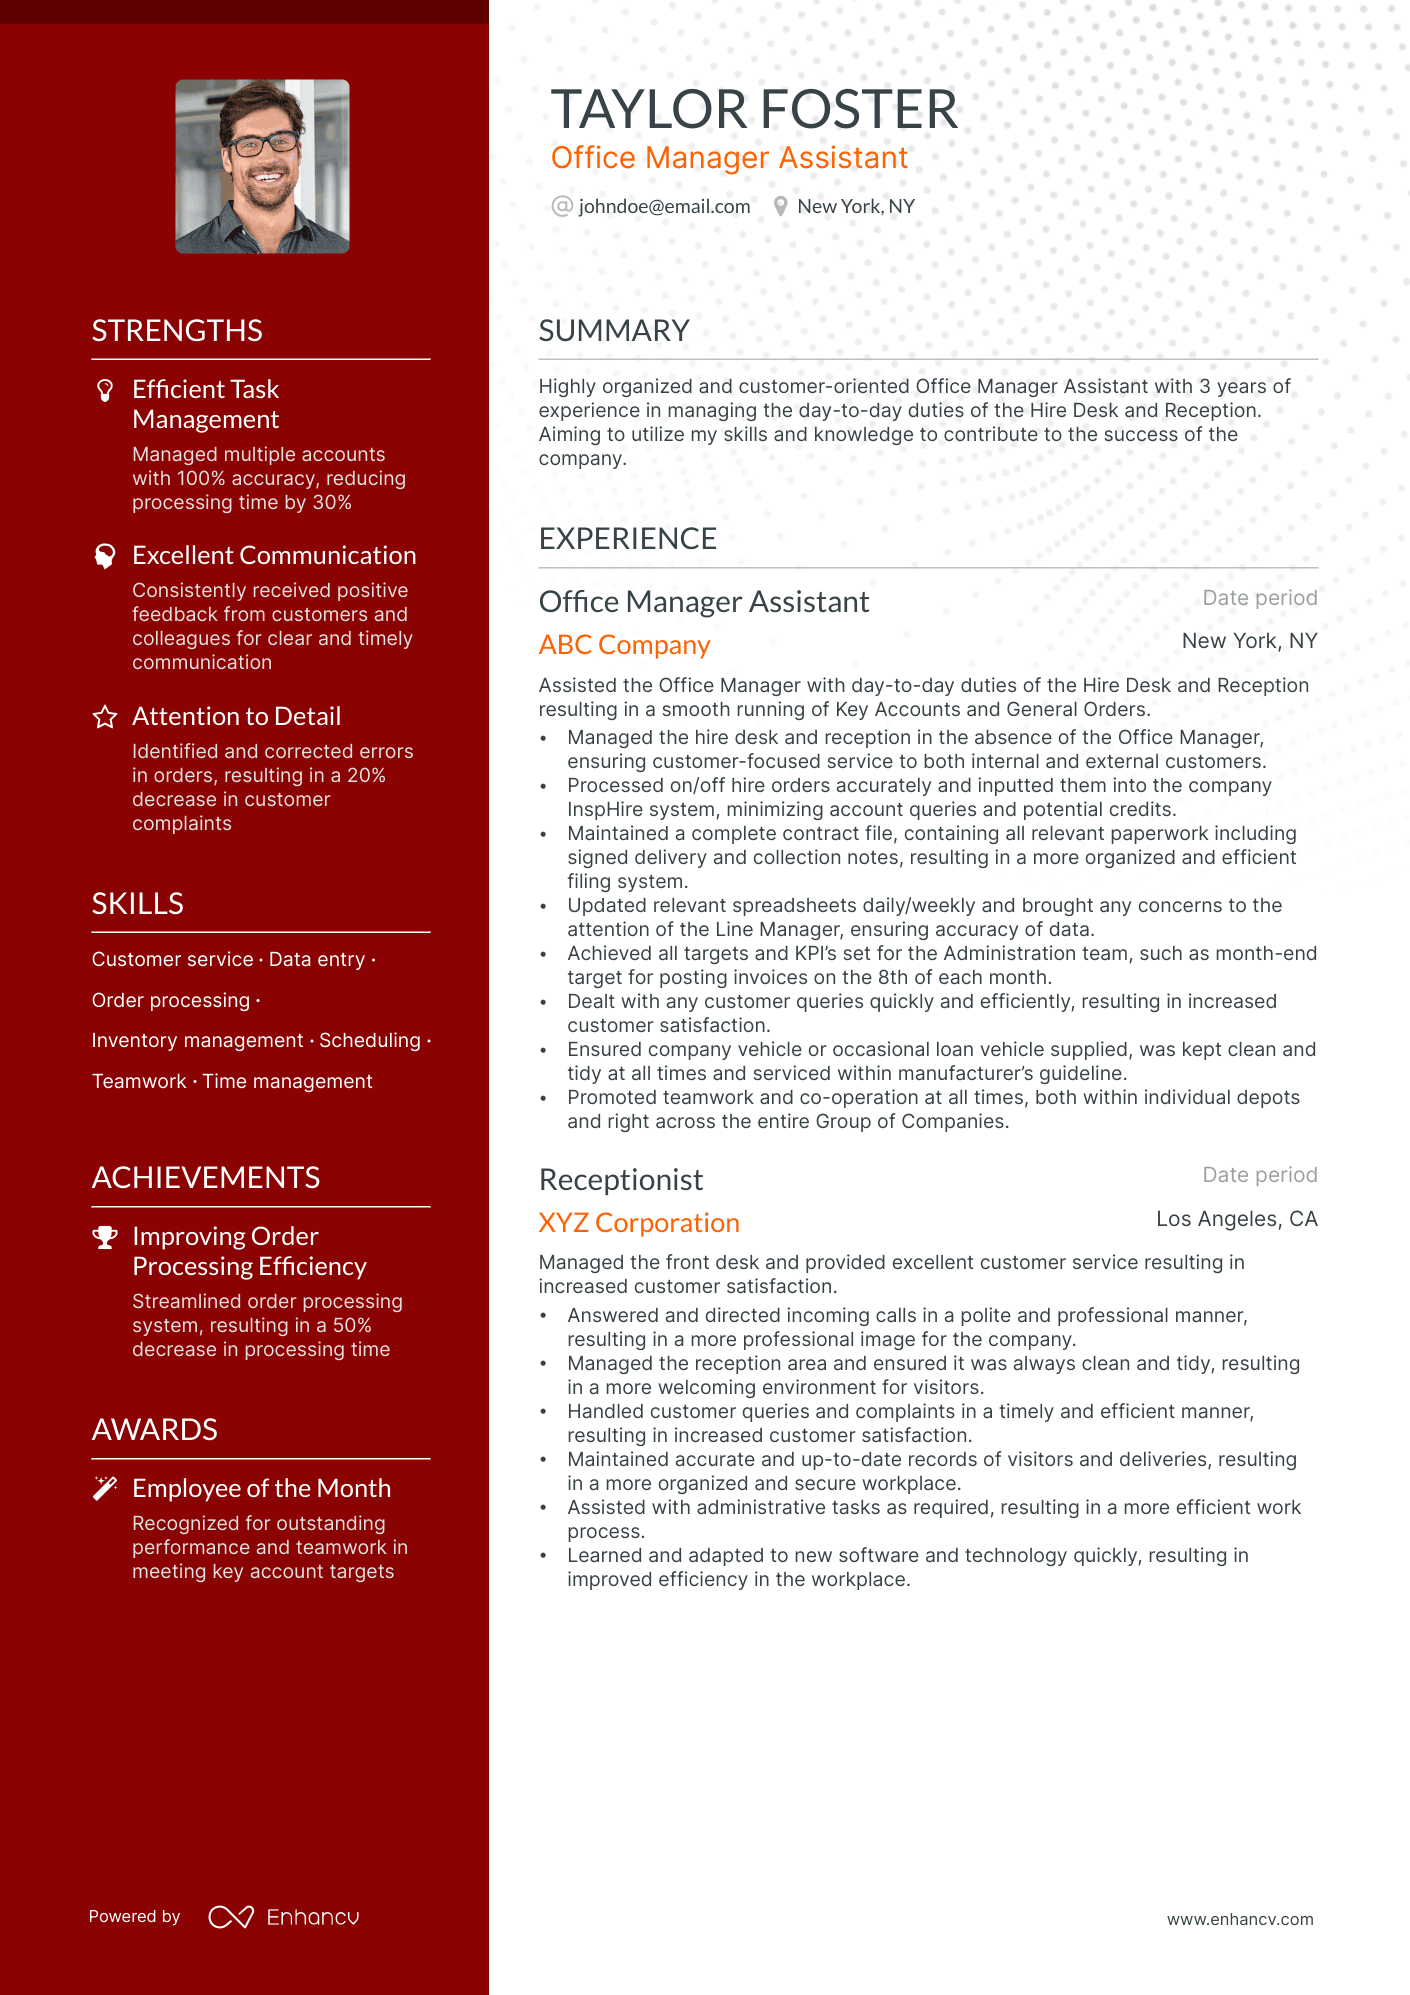 Office Manager Assistant resume example